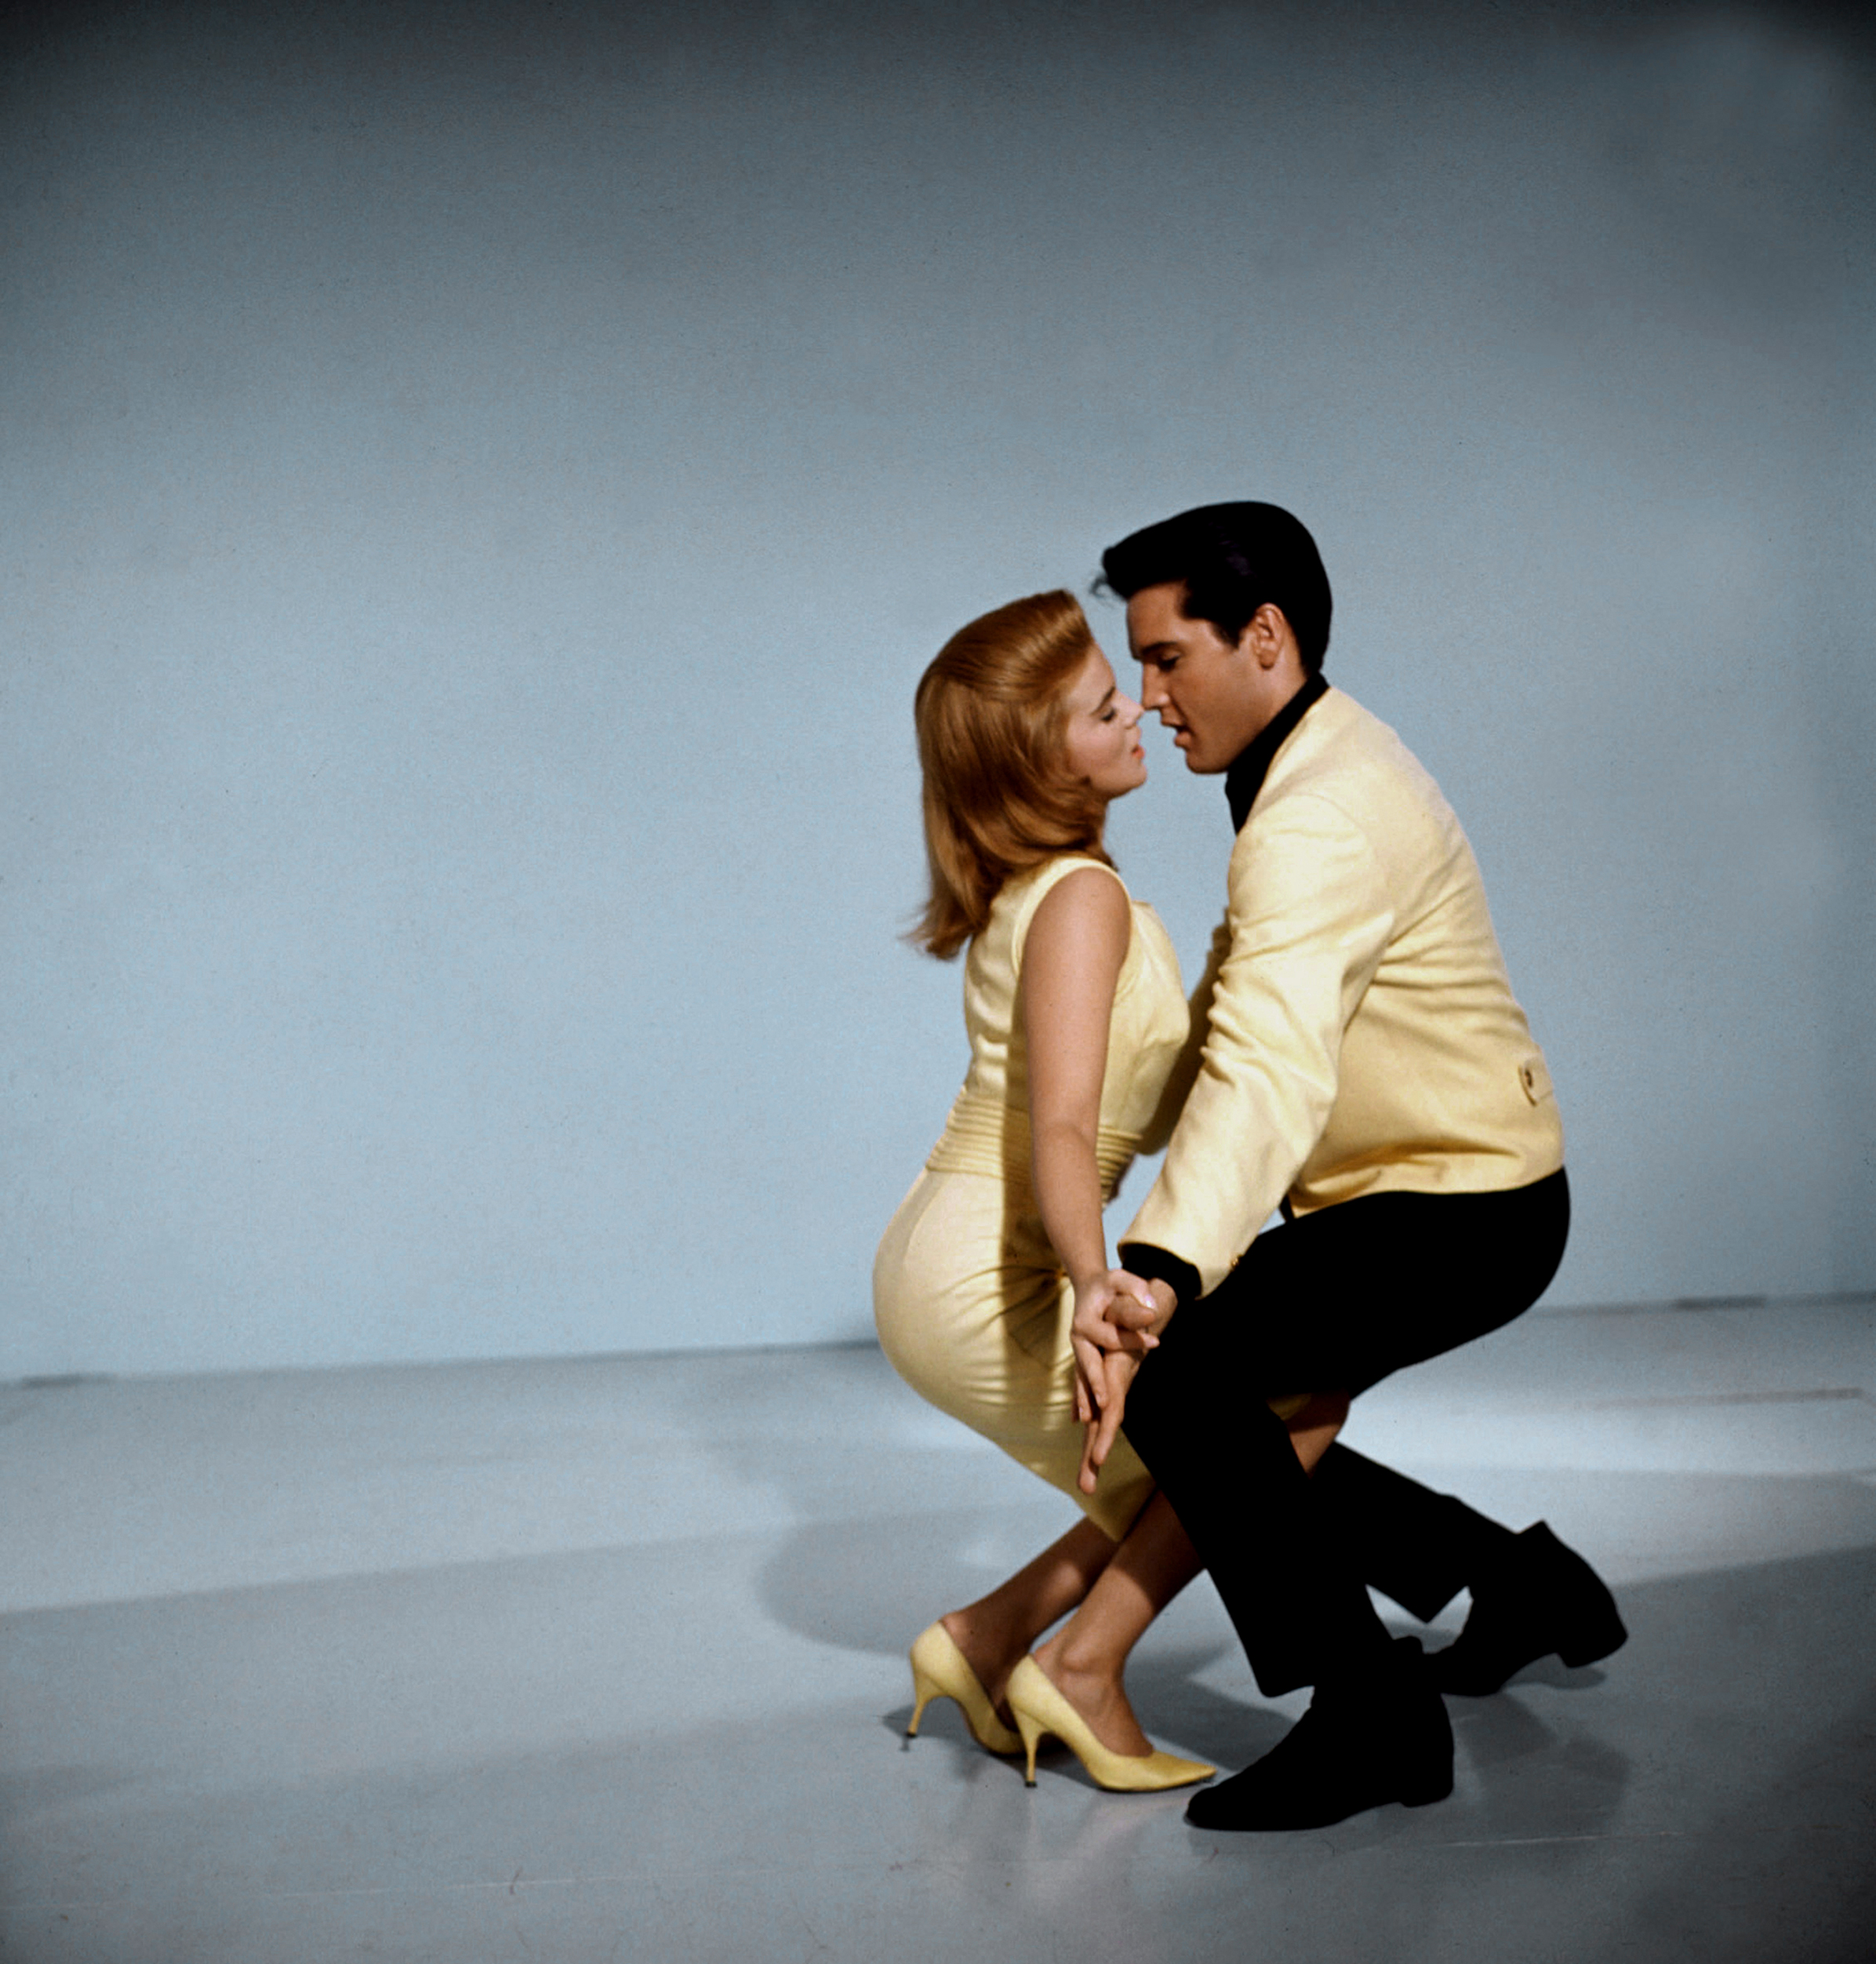 Swedish-American actress, singer and dancer Ann-Margret and Elvis promoting the movie 'Viva Las Vegas,' 1964. (Sunset Boulevard/Corbis/Getty Images)